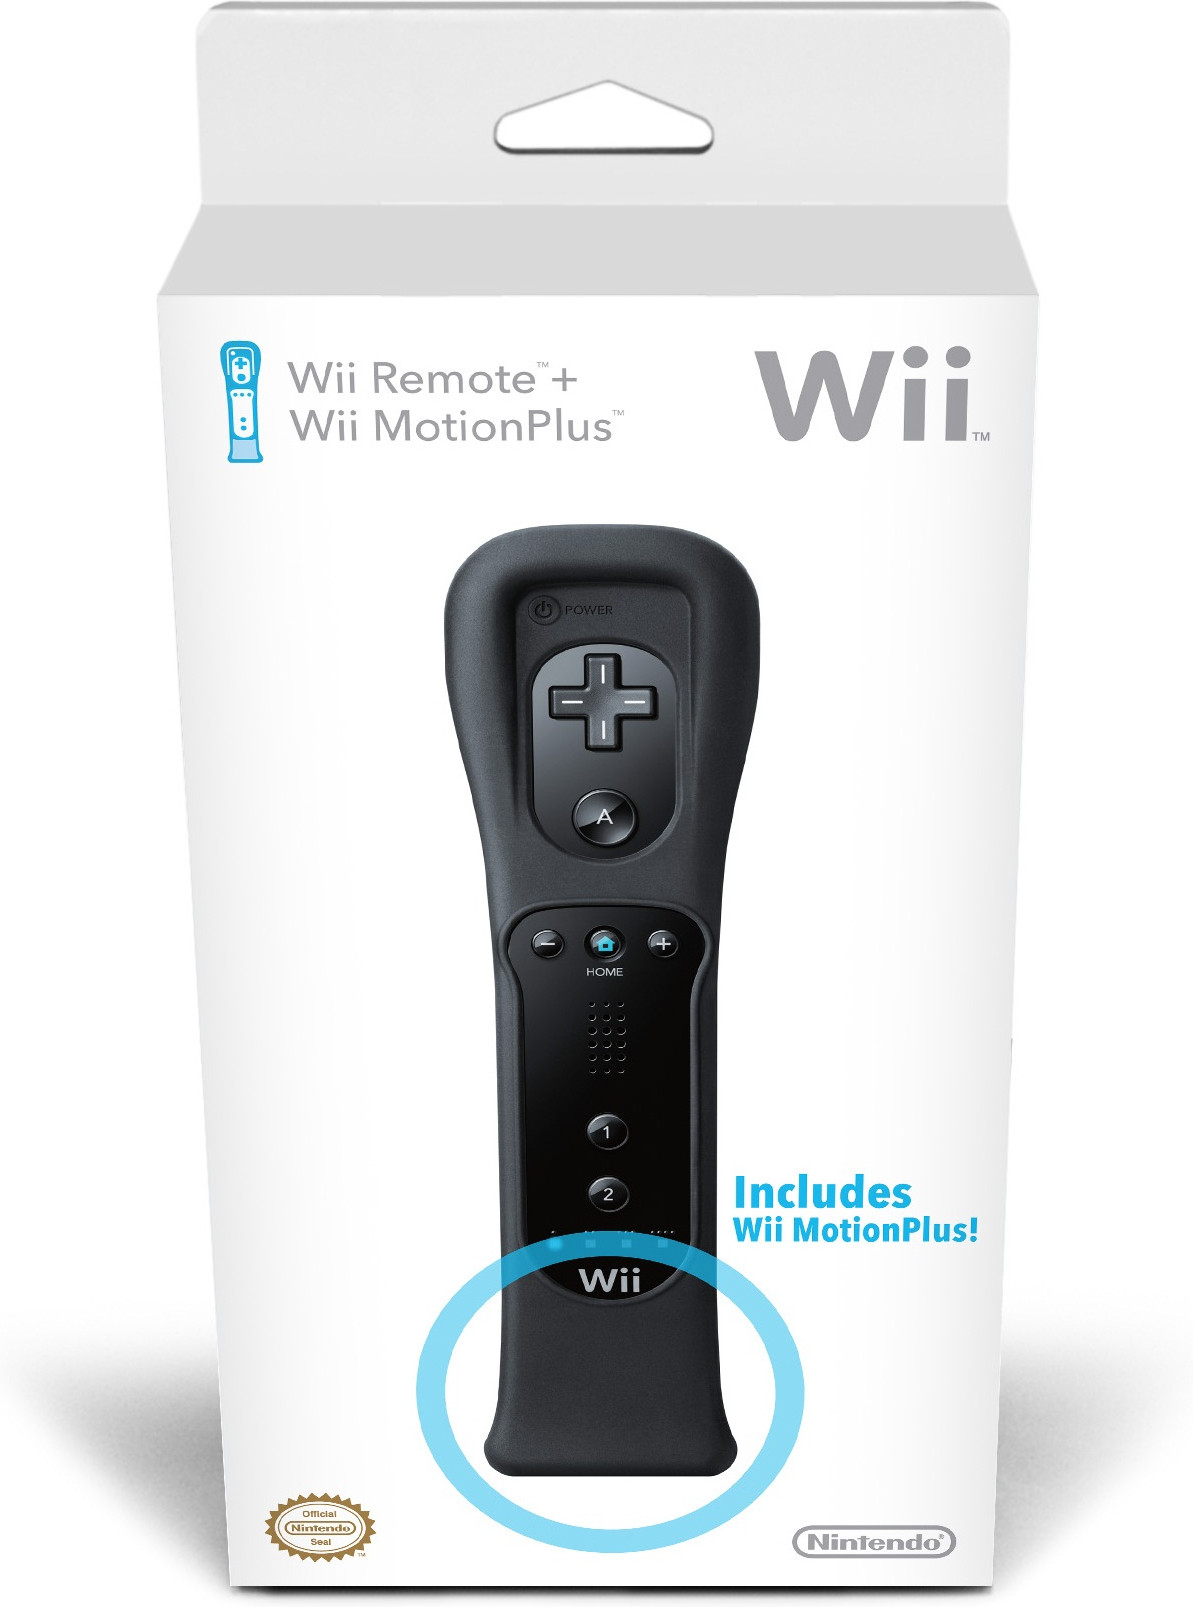 Wii Remote (Black) + Motion Plus (boxed)